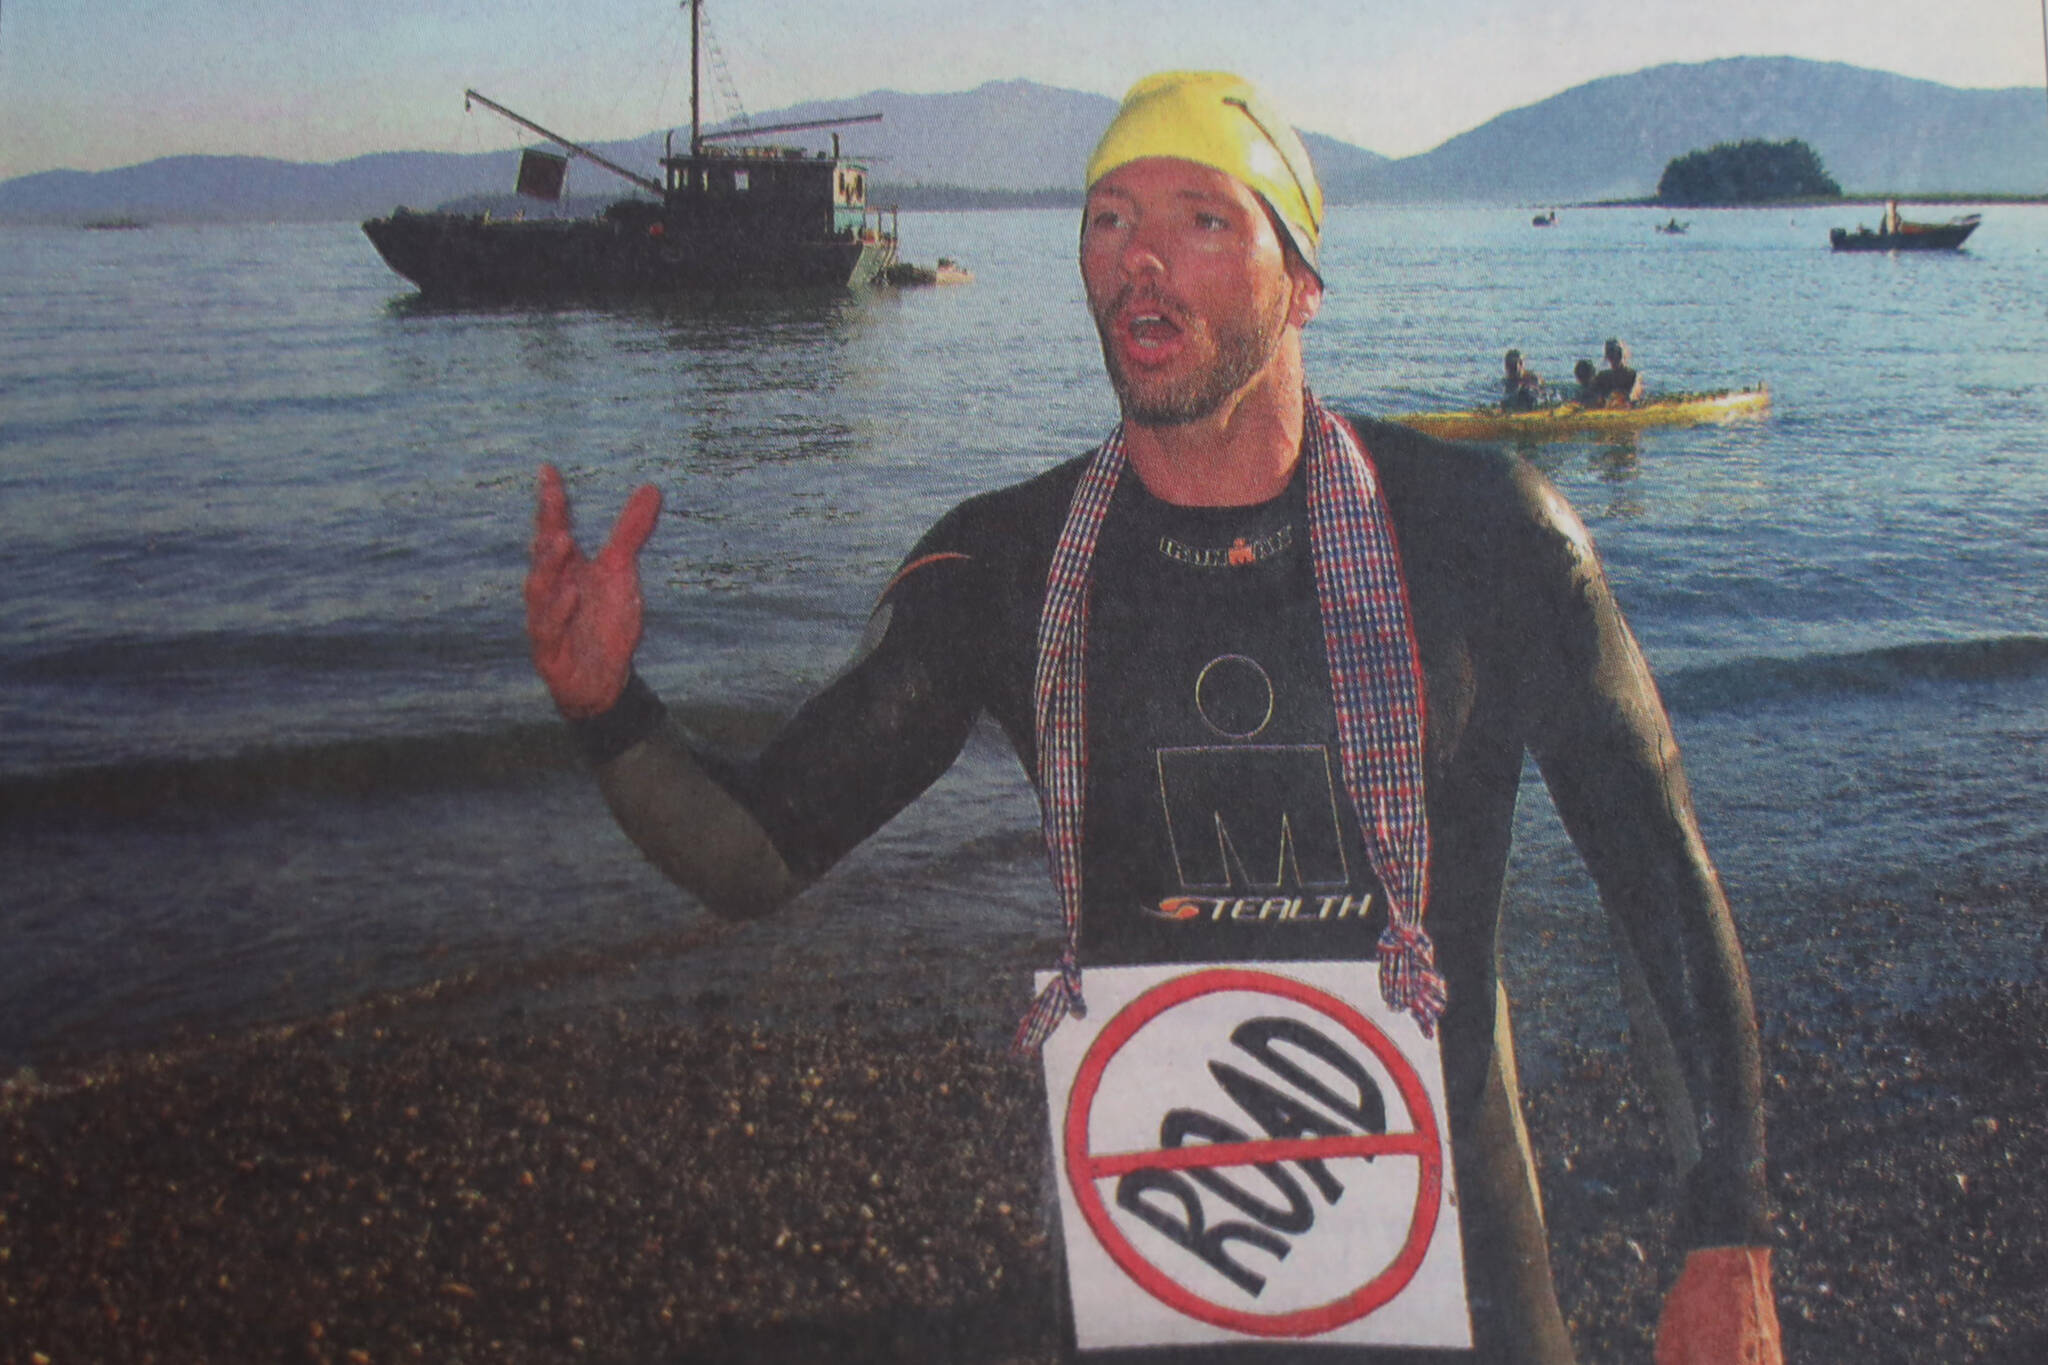 Steve Vick delivers a speech at Auke Village Recreation Area after completing his nine-day, 92-mile swim from Skagway on Wednesday, Aug. 10, 2005. Vick swam to call attention to the proposed Juneau to Skagway road. (Brian Wallace / Juneau Empire Archives)